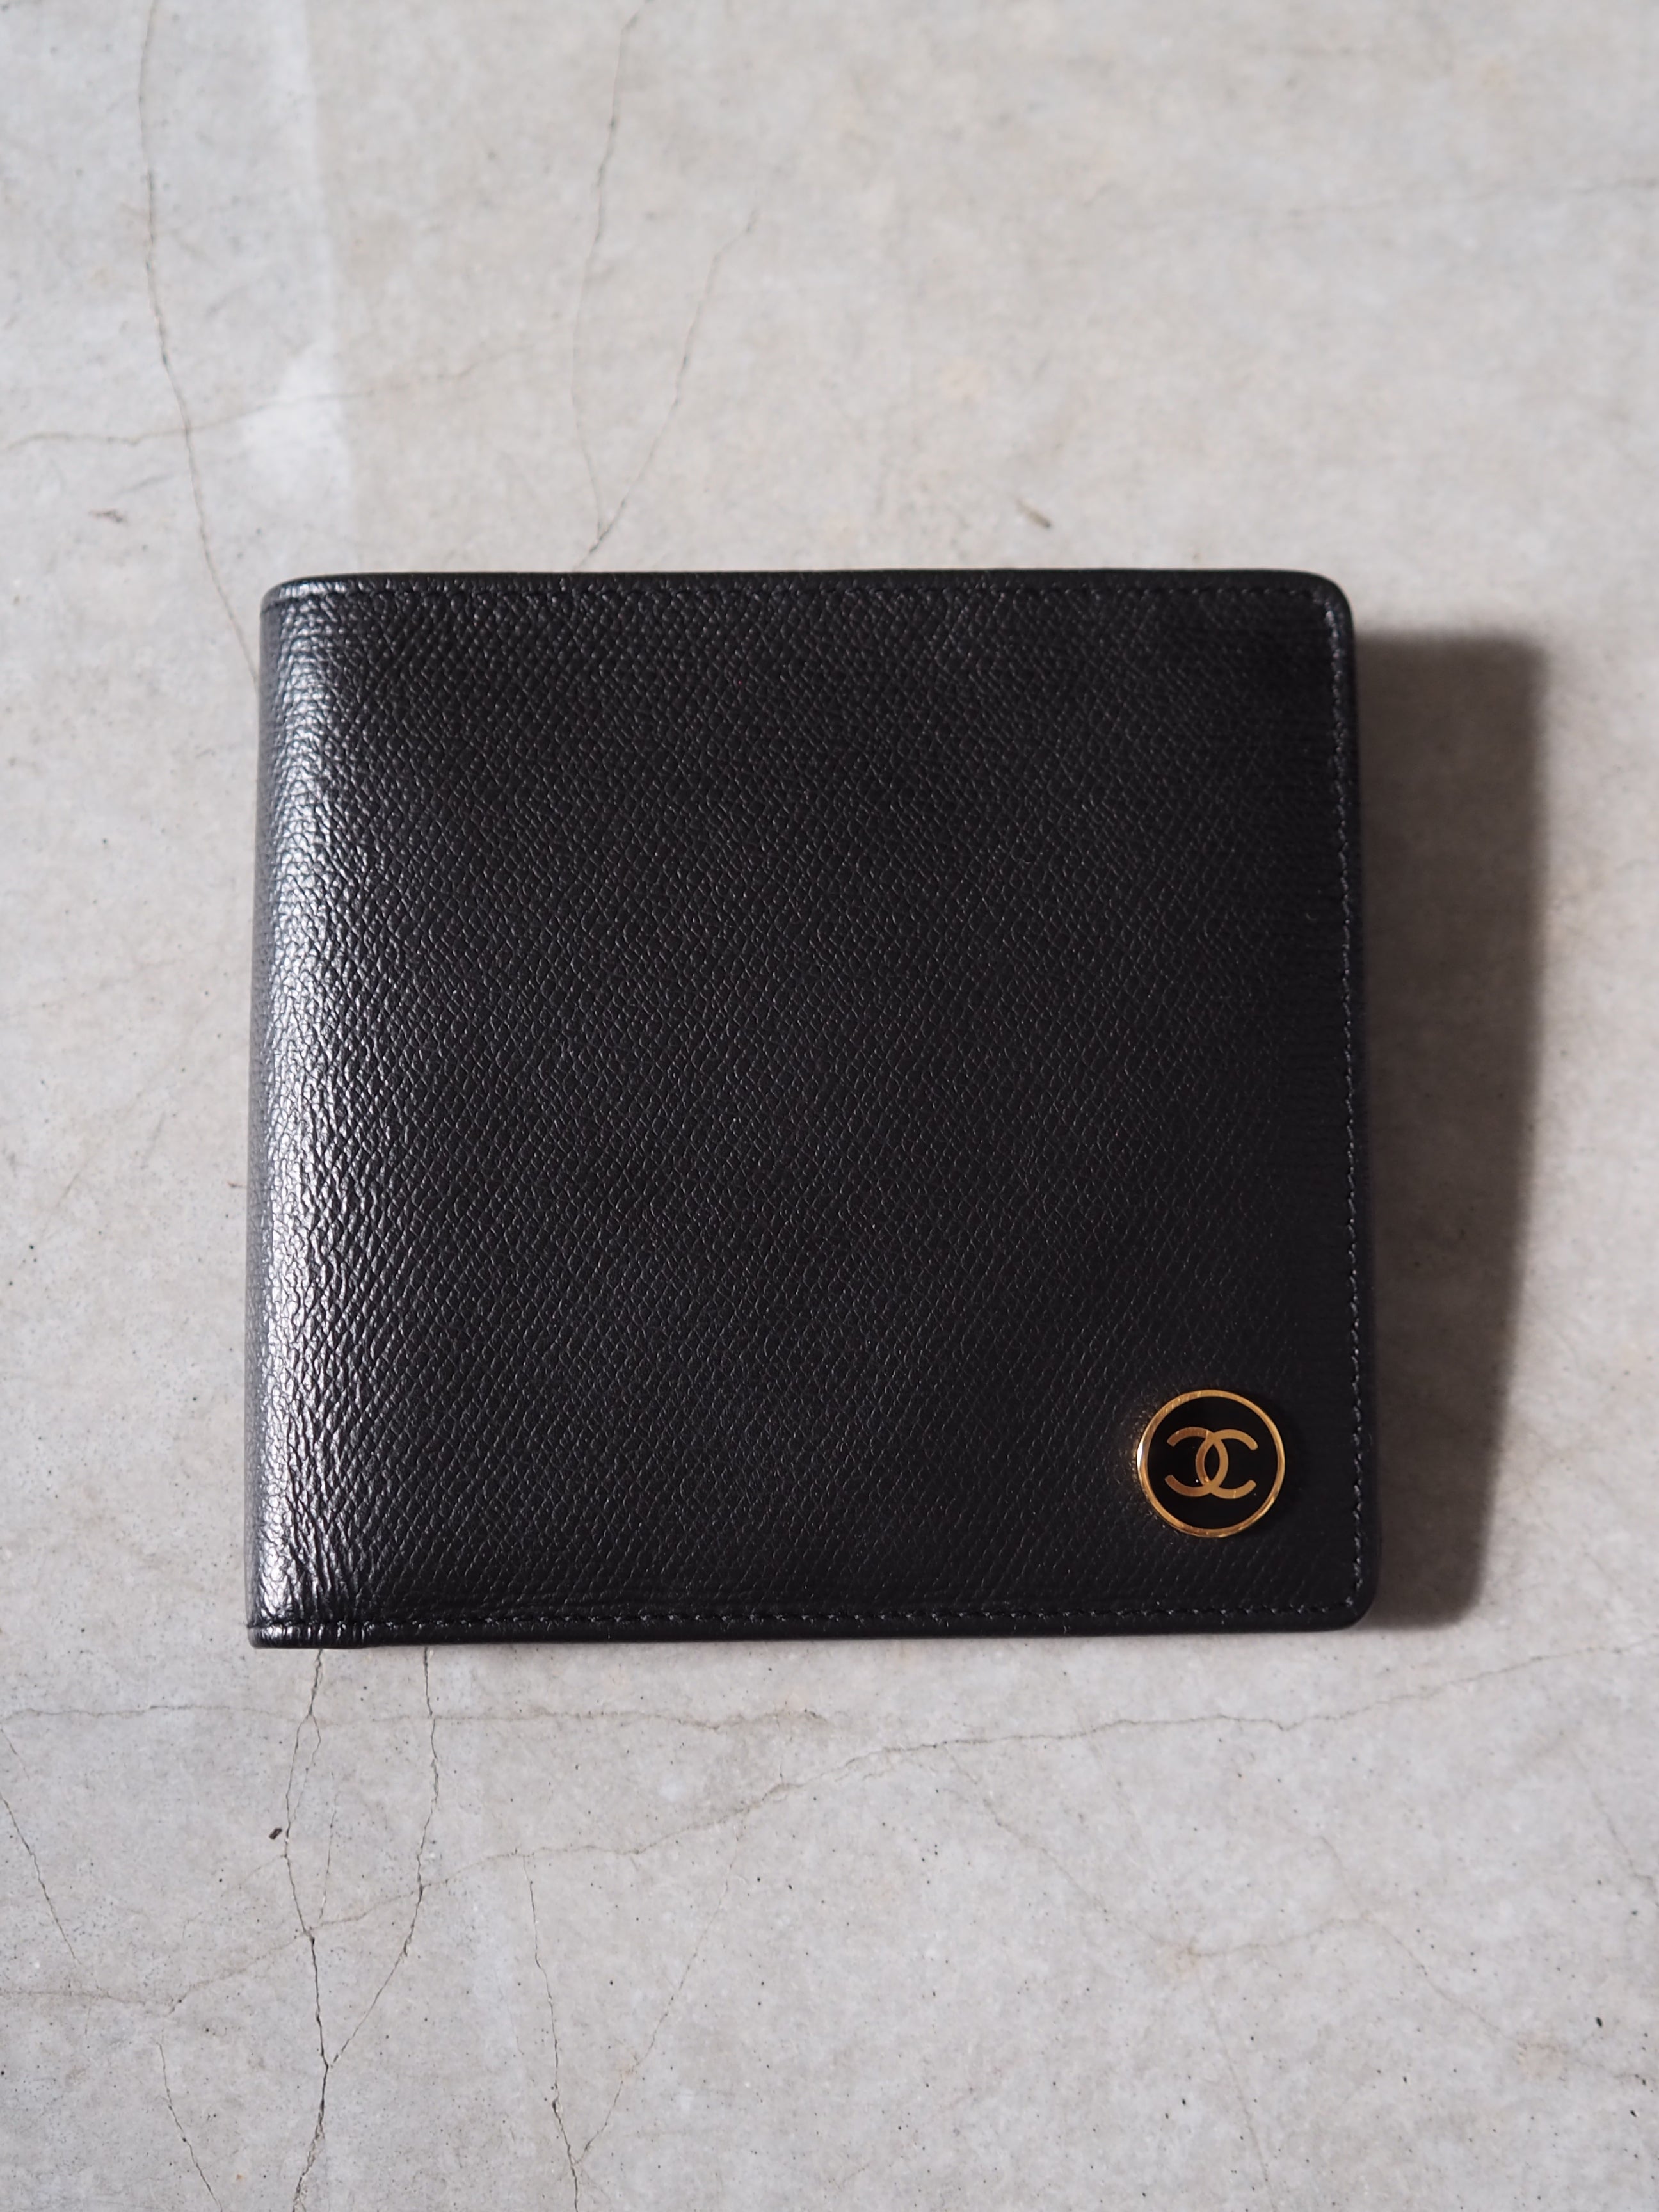 CHANEL COCO Button Compact Wallet 